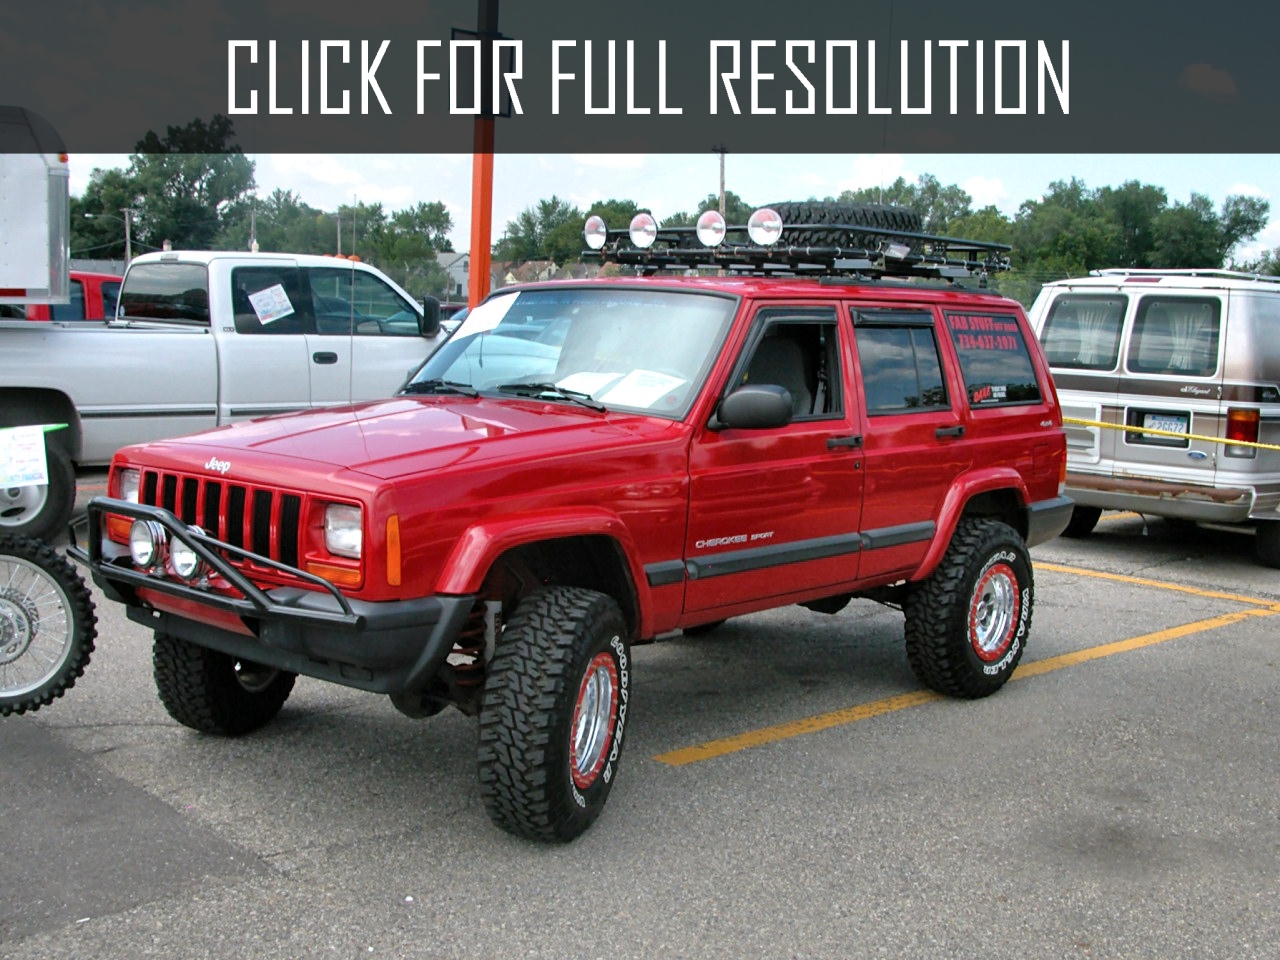 2002 Jeep Cherokee Classic news, reviews, msrp, ratings